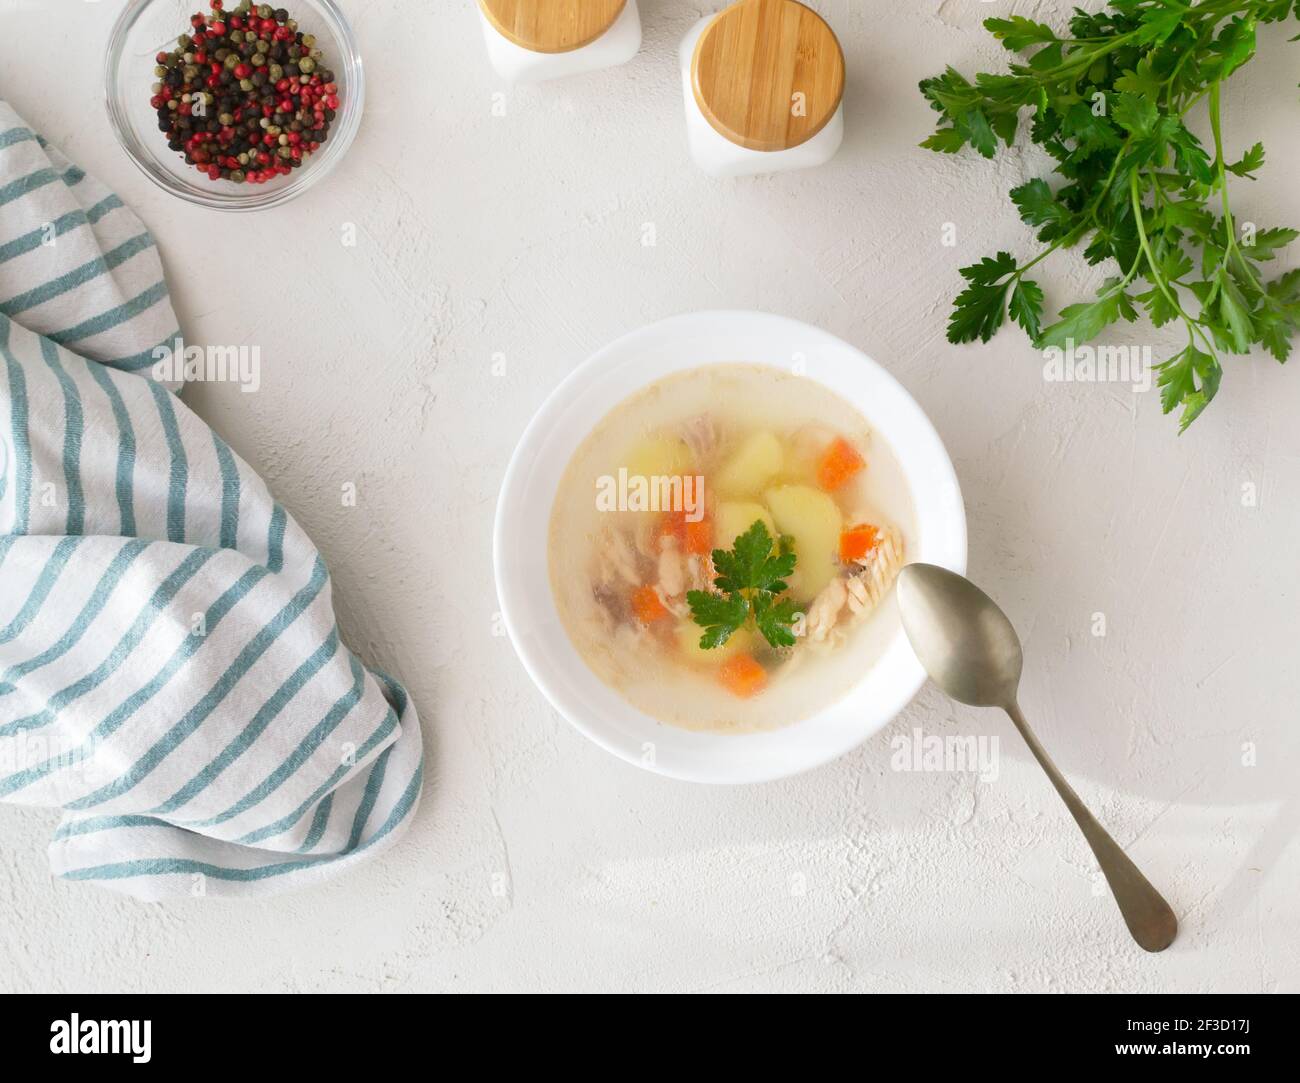 Clear fish soup with pieces of vegetables and salmon in a white bowl on a white plate. Healthy food concept. Top view. Horizontal orientation. Stock Photo